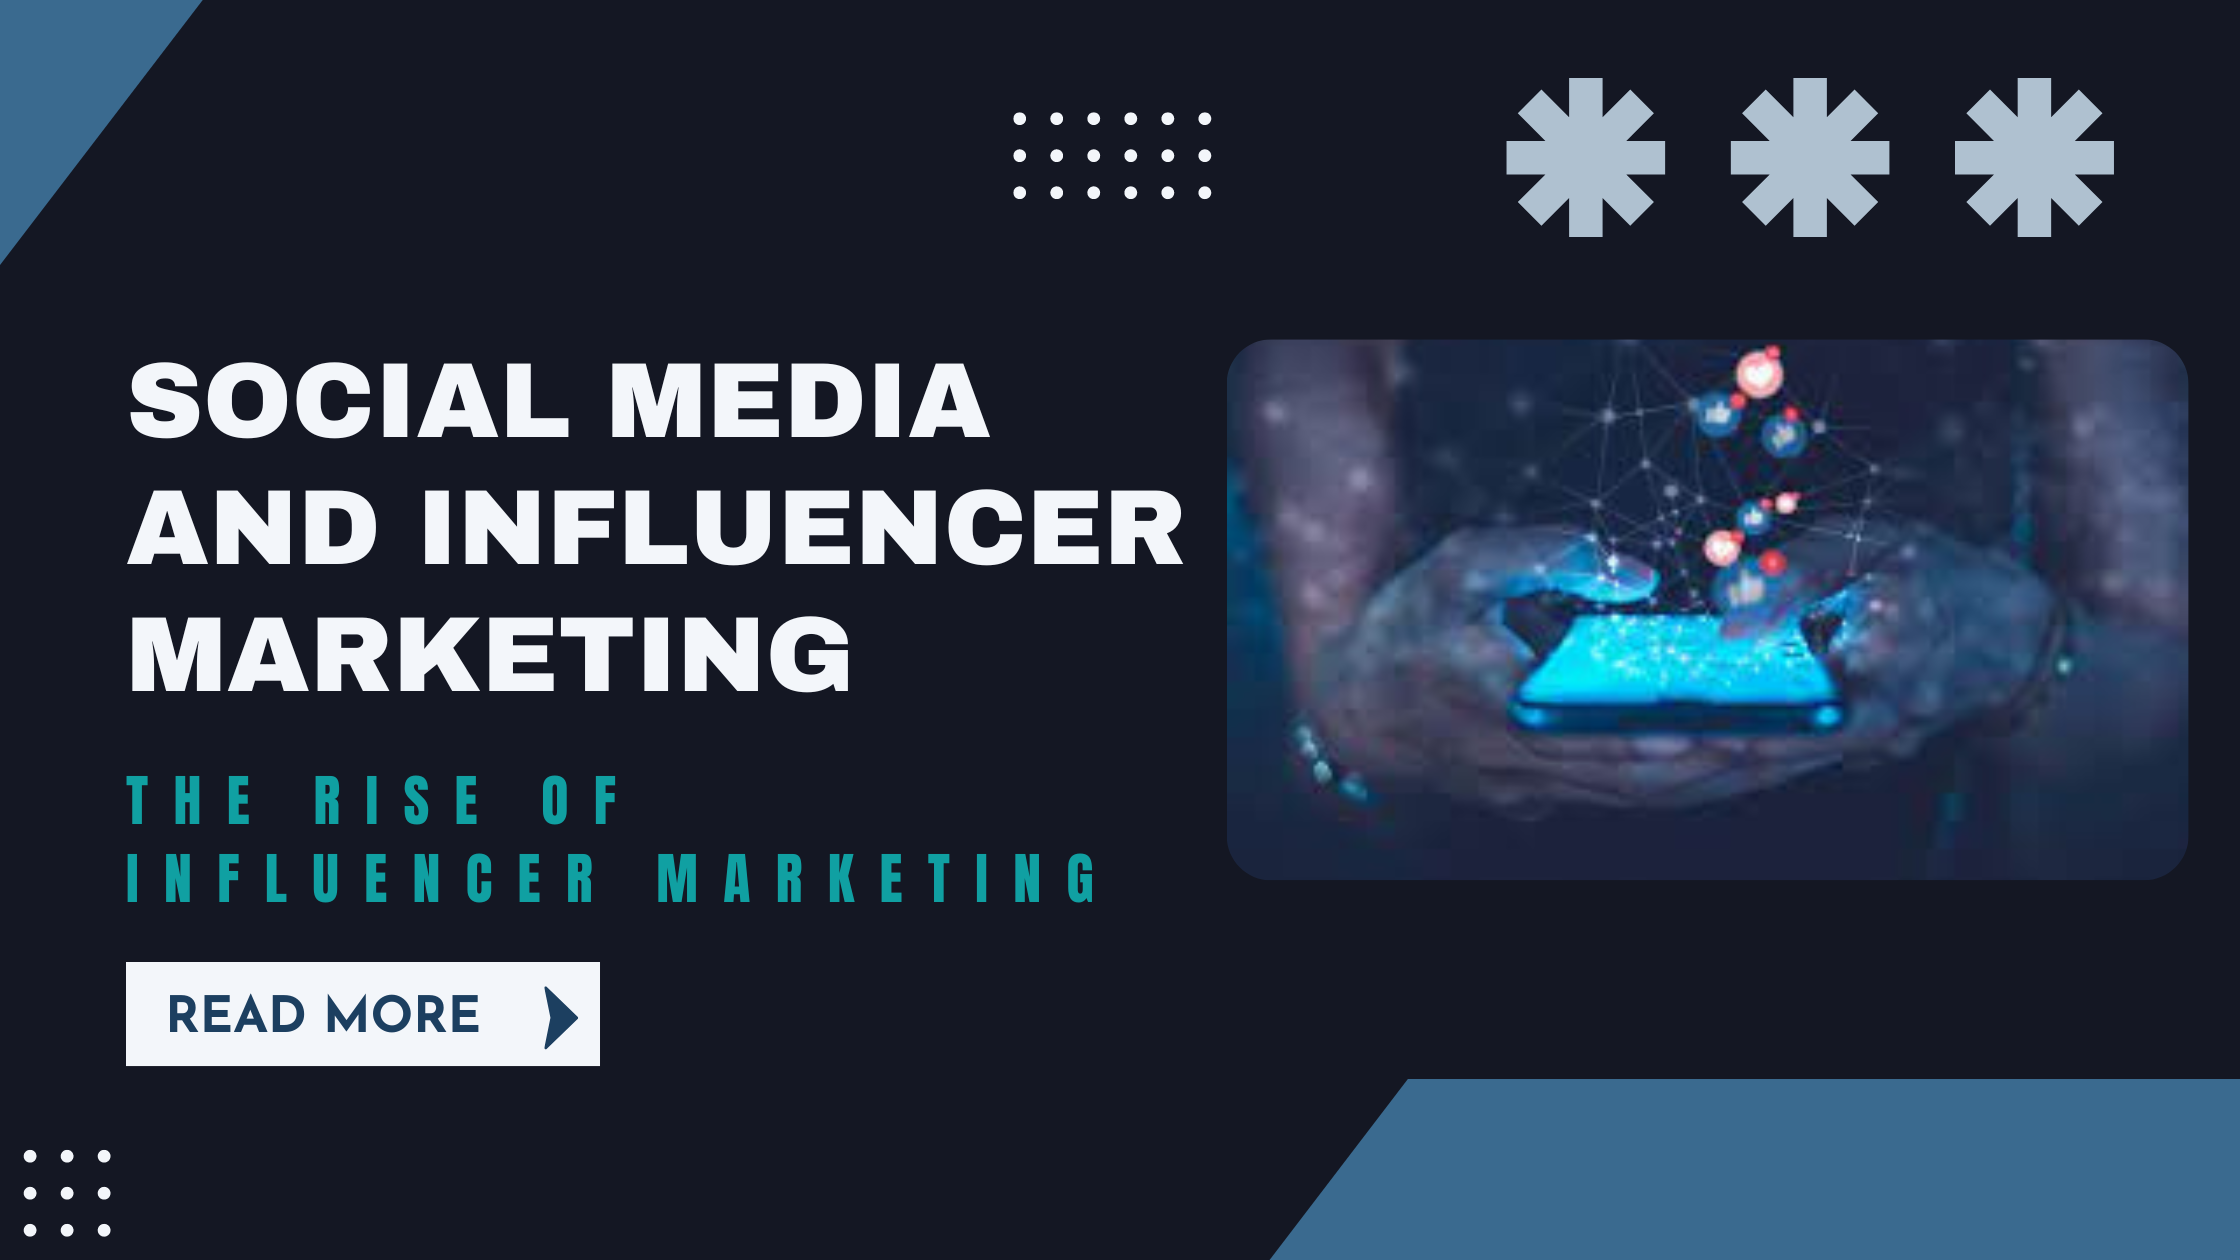 Social Media and Influencer Marketing in Tech